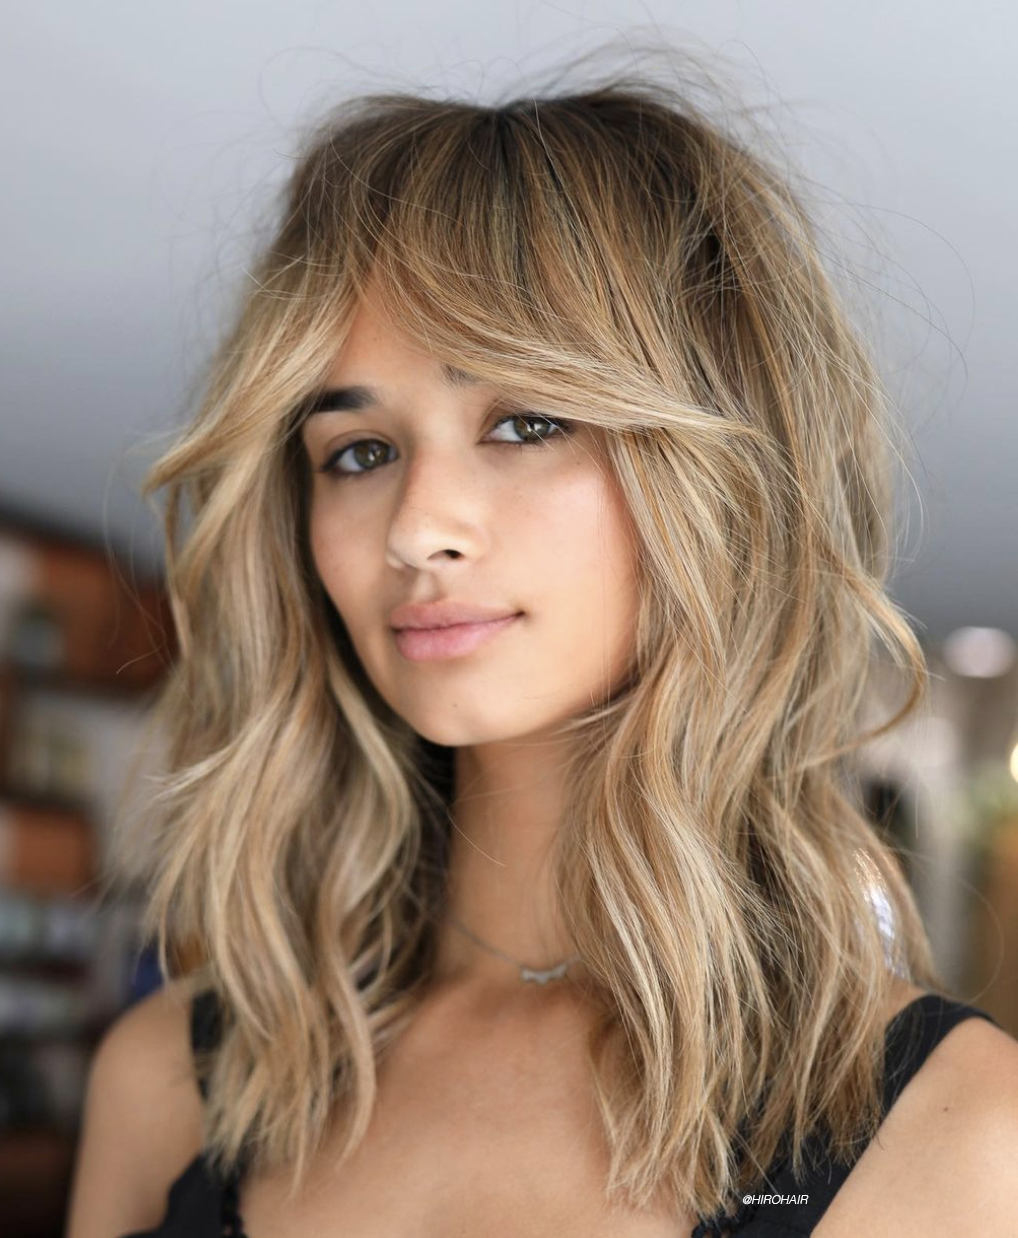 How To Choose A Fringe - Bangstyle - House of Hair Inspiration